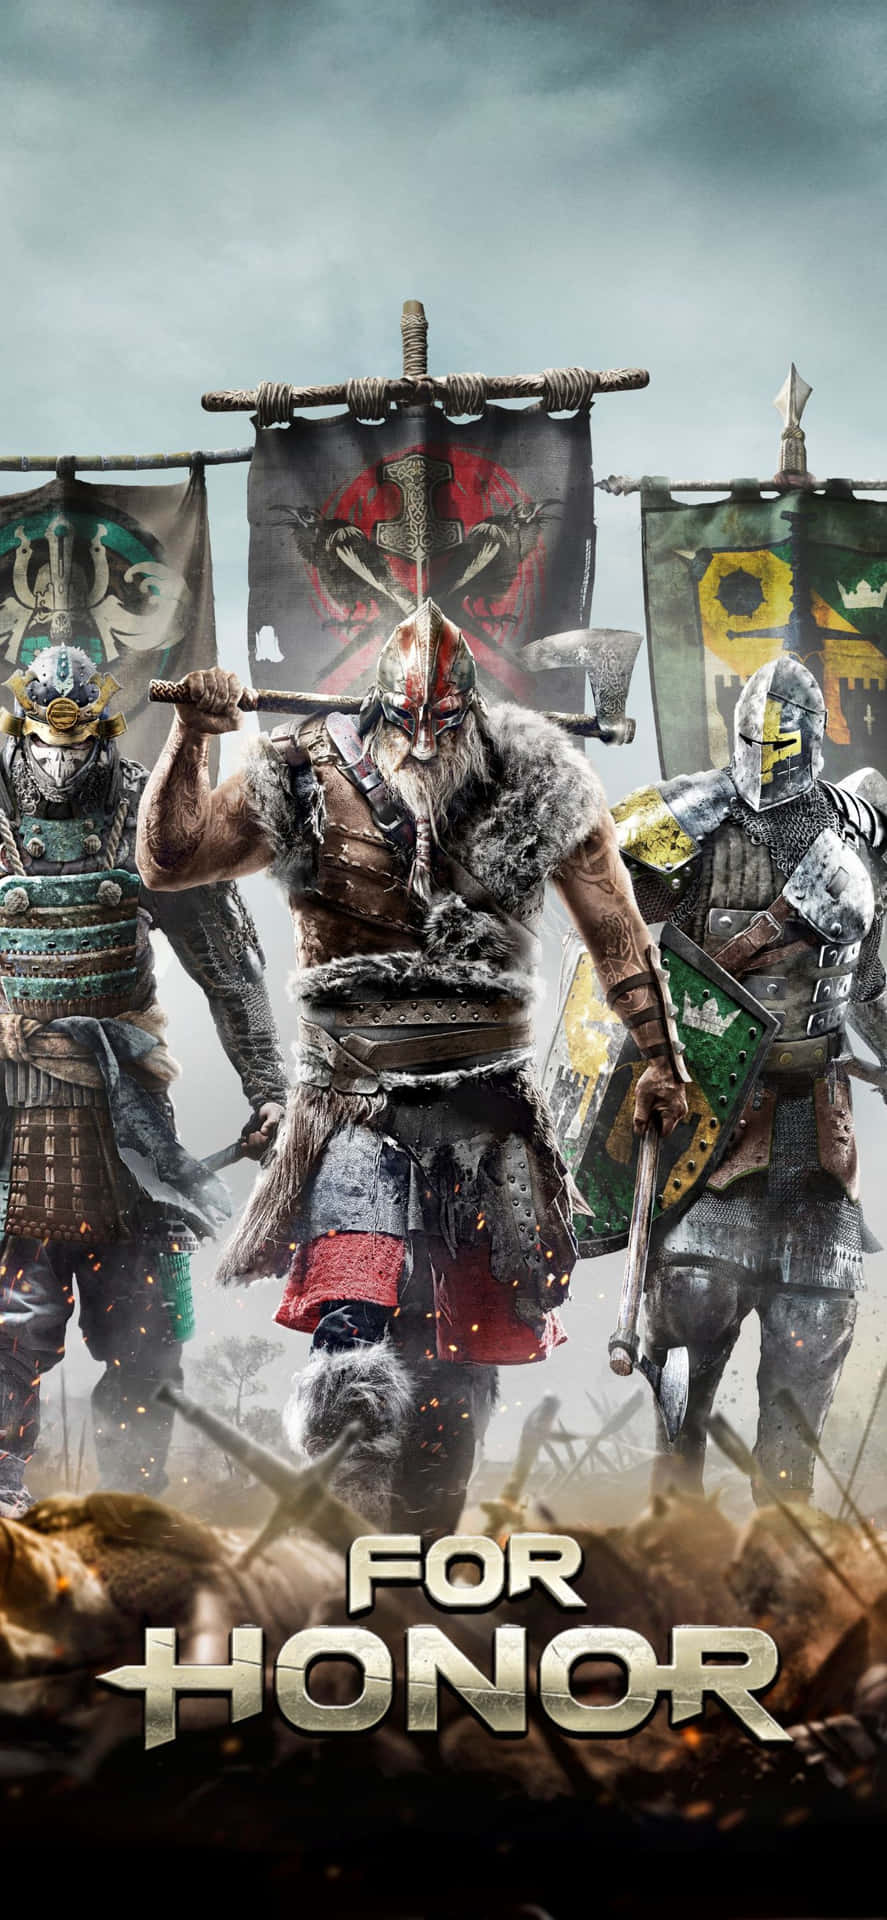 For Honor Pc Game